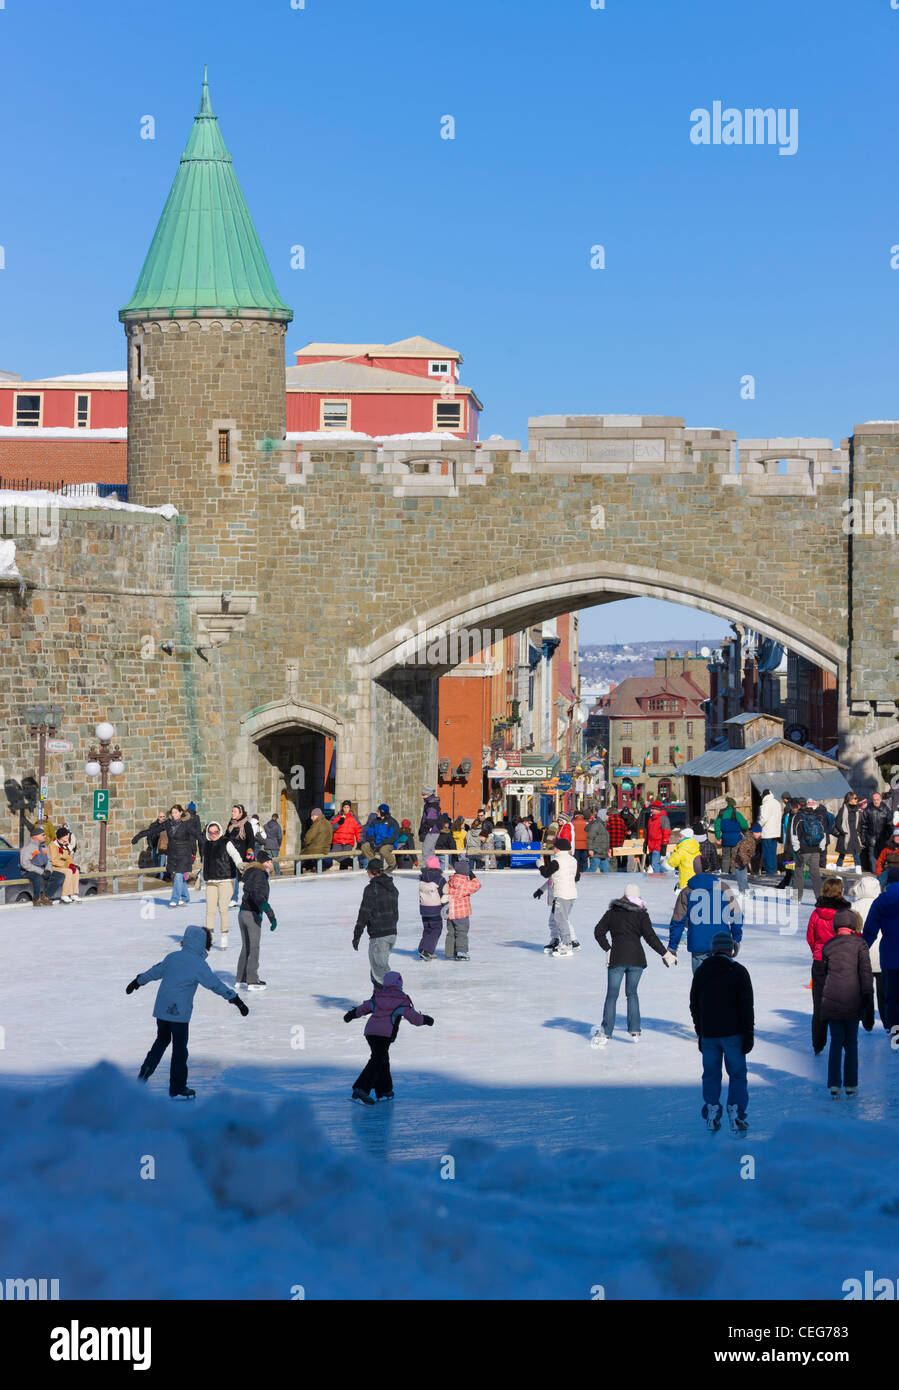 Skate ring at the entrance to the old town, Quebec City (UNESCO World Heritage site), Canada Stock Photo